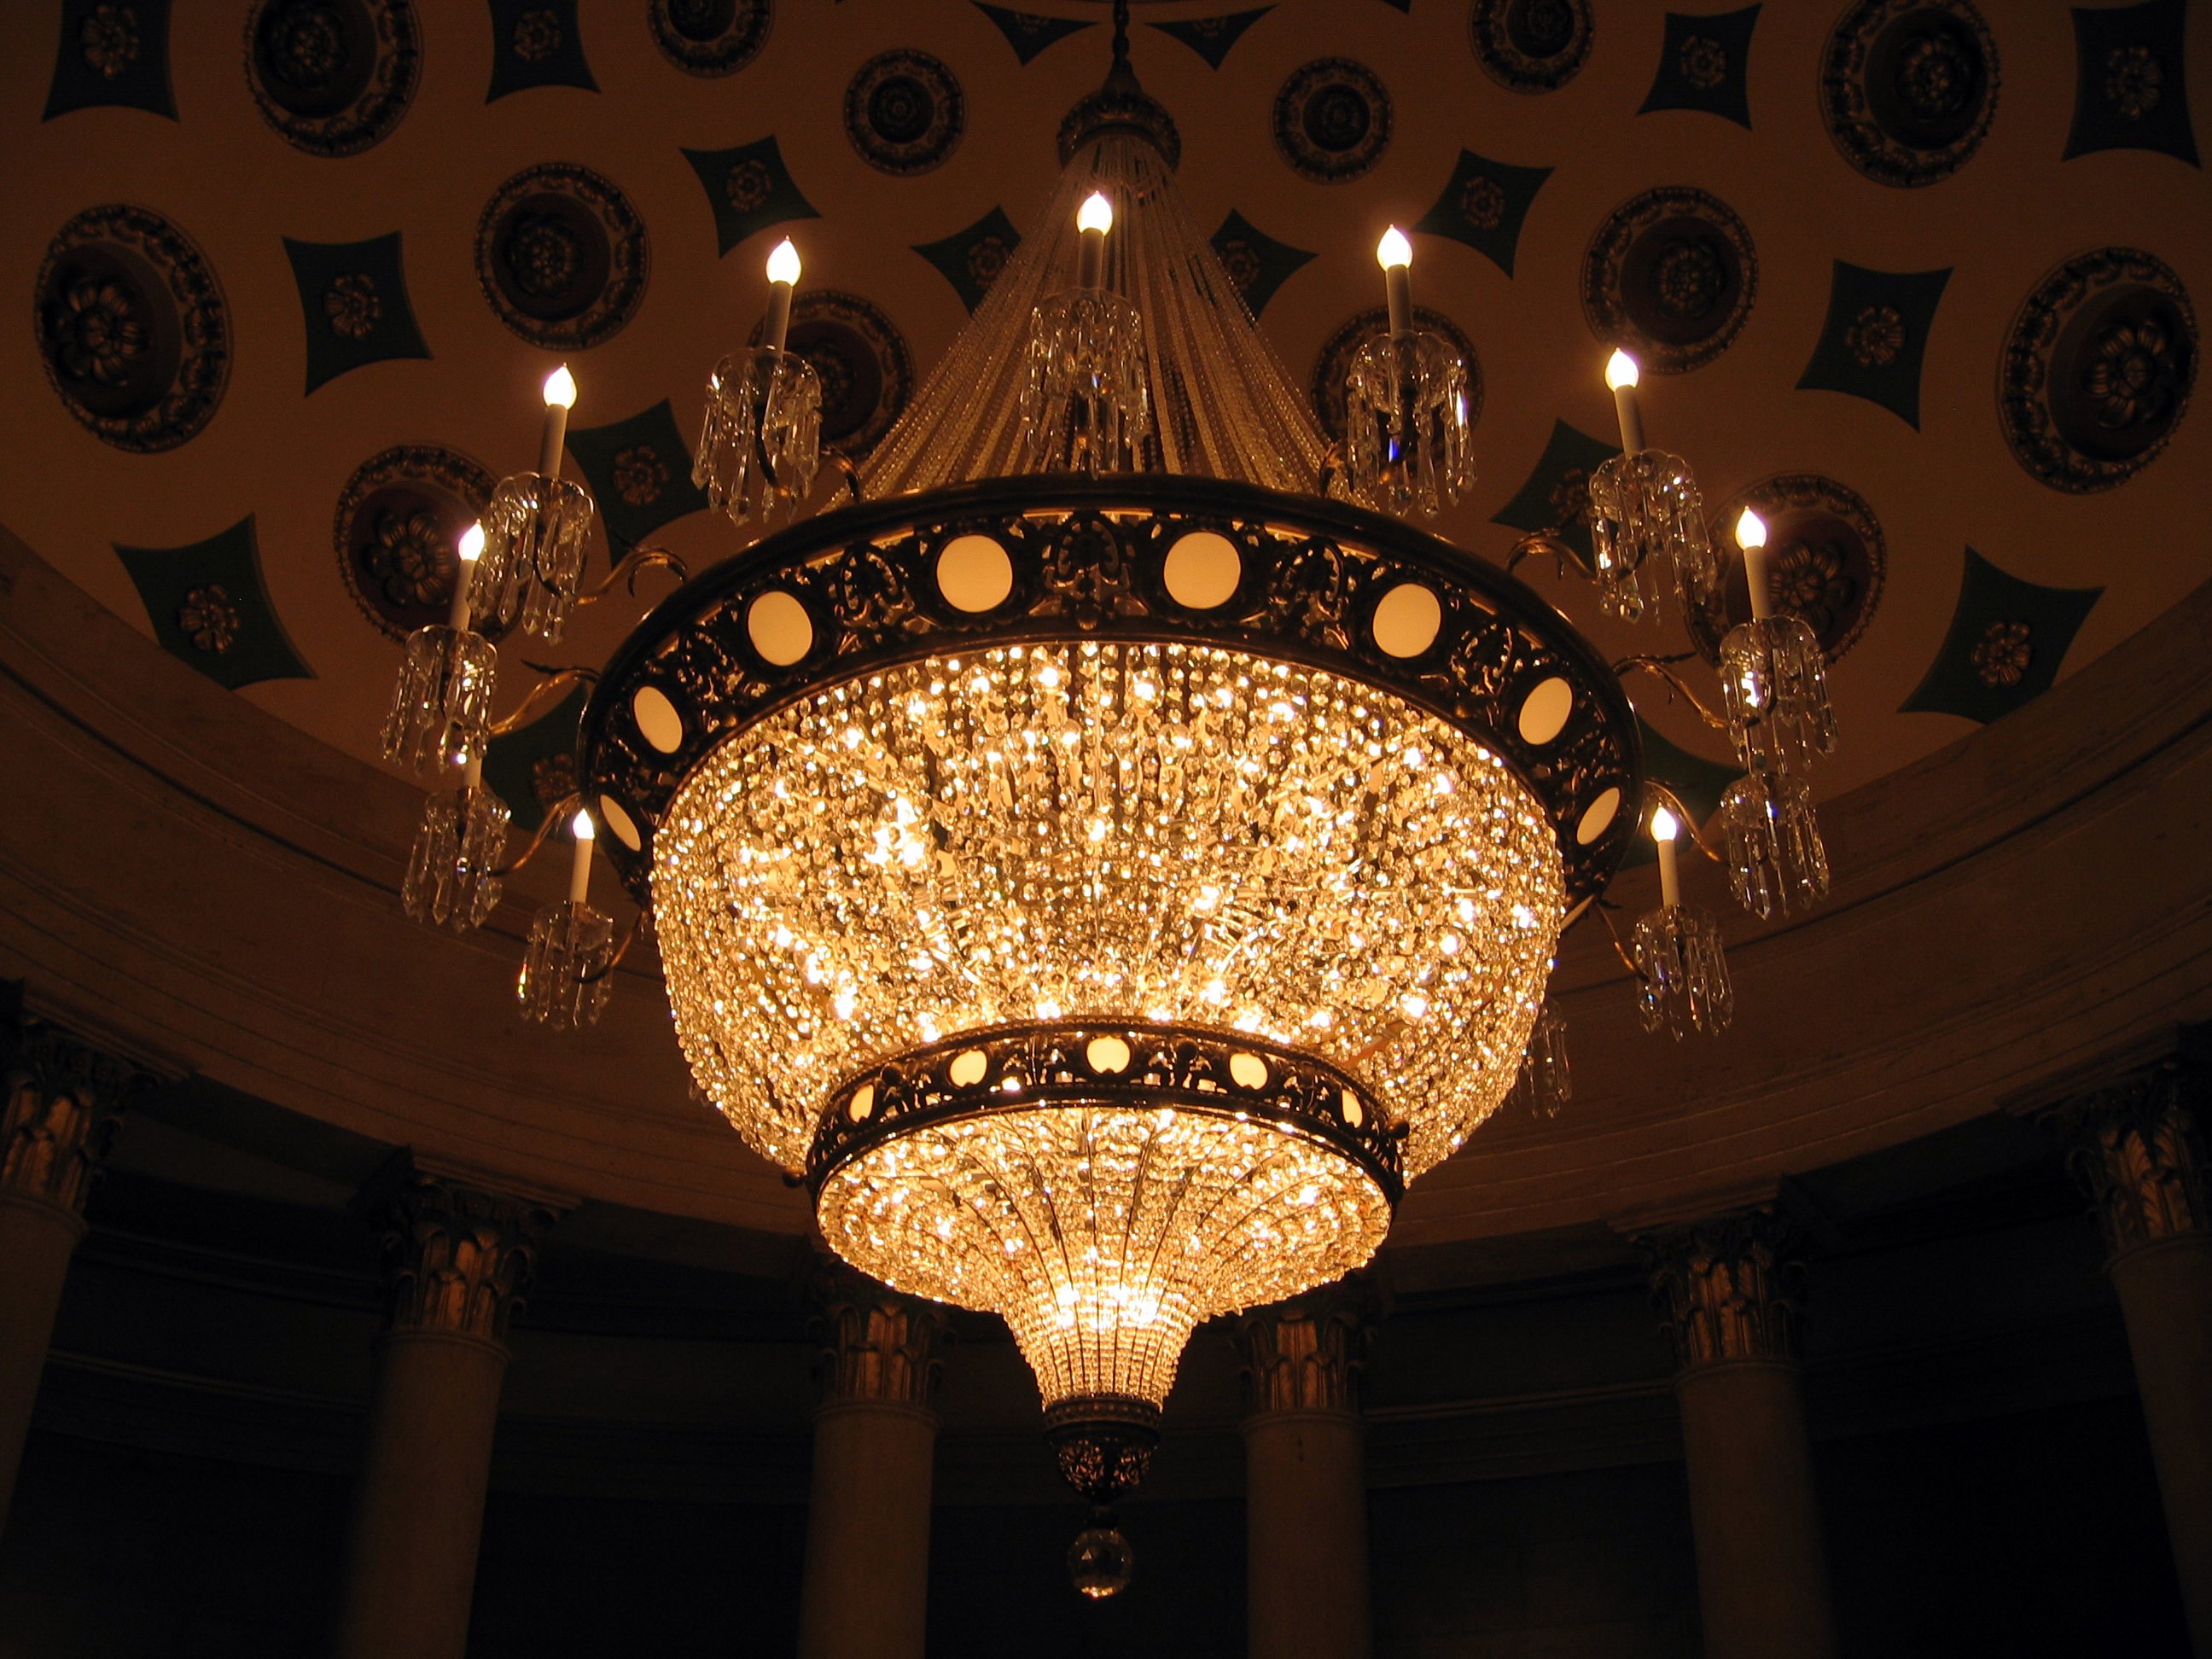 A chandelier